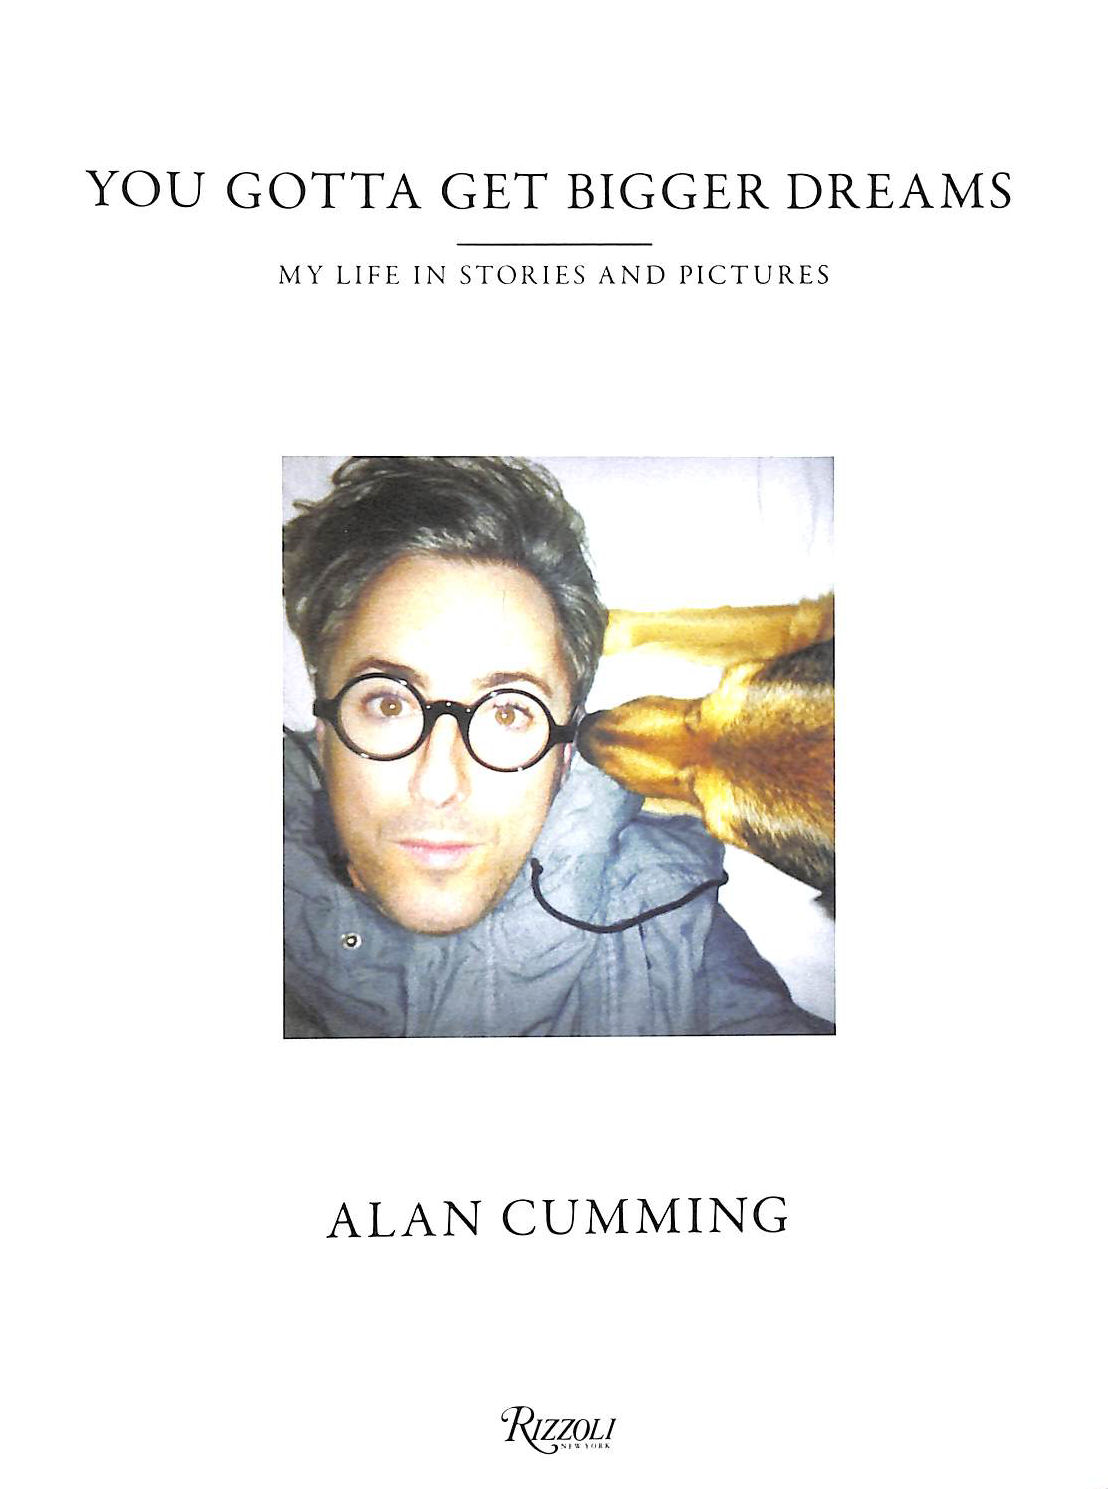 ALAN CUMMING - You Gotta Get Bigger Dreams: And Other Stories: My Life in Stories and Pictures